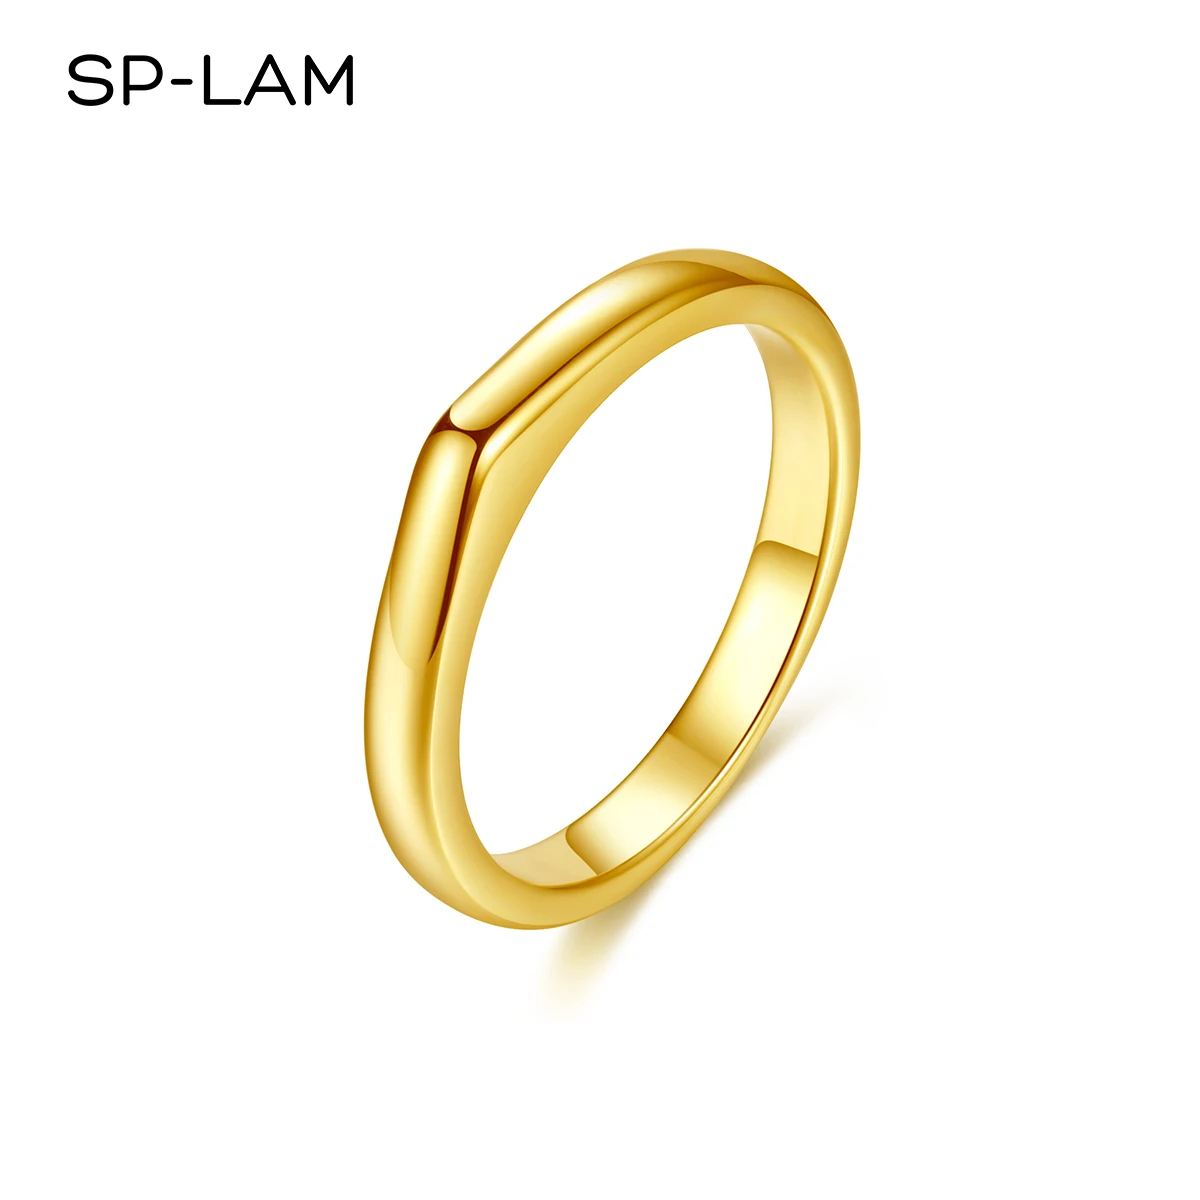 

SP-LAM Gold Plated Minimalist Jewelry Band Fashion Geometric Design 14K Dainty Ring for Woman